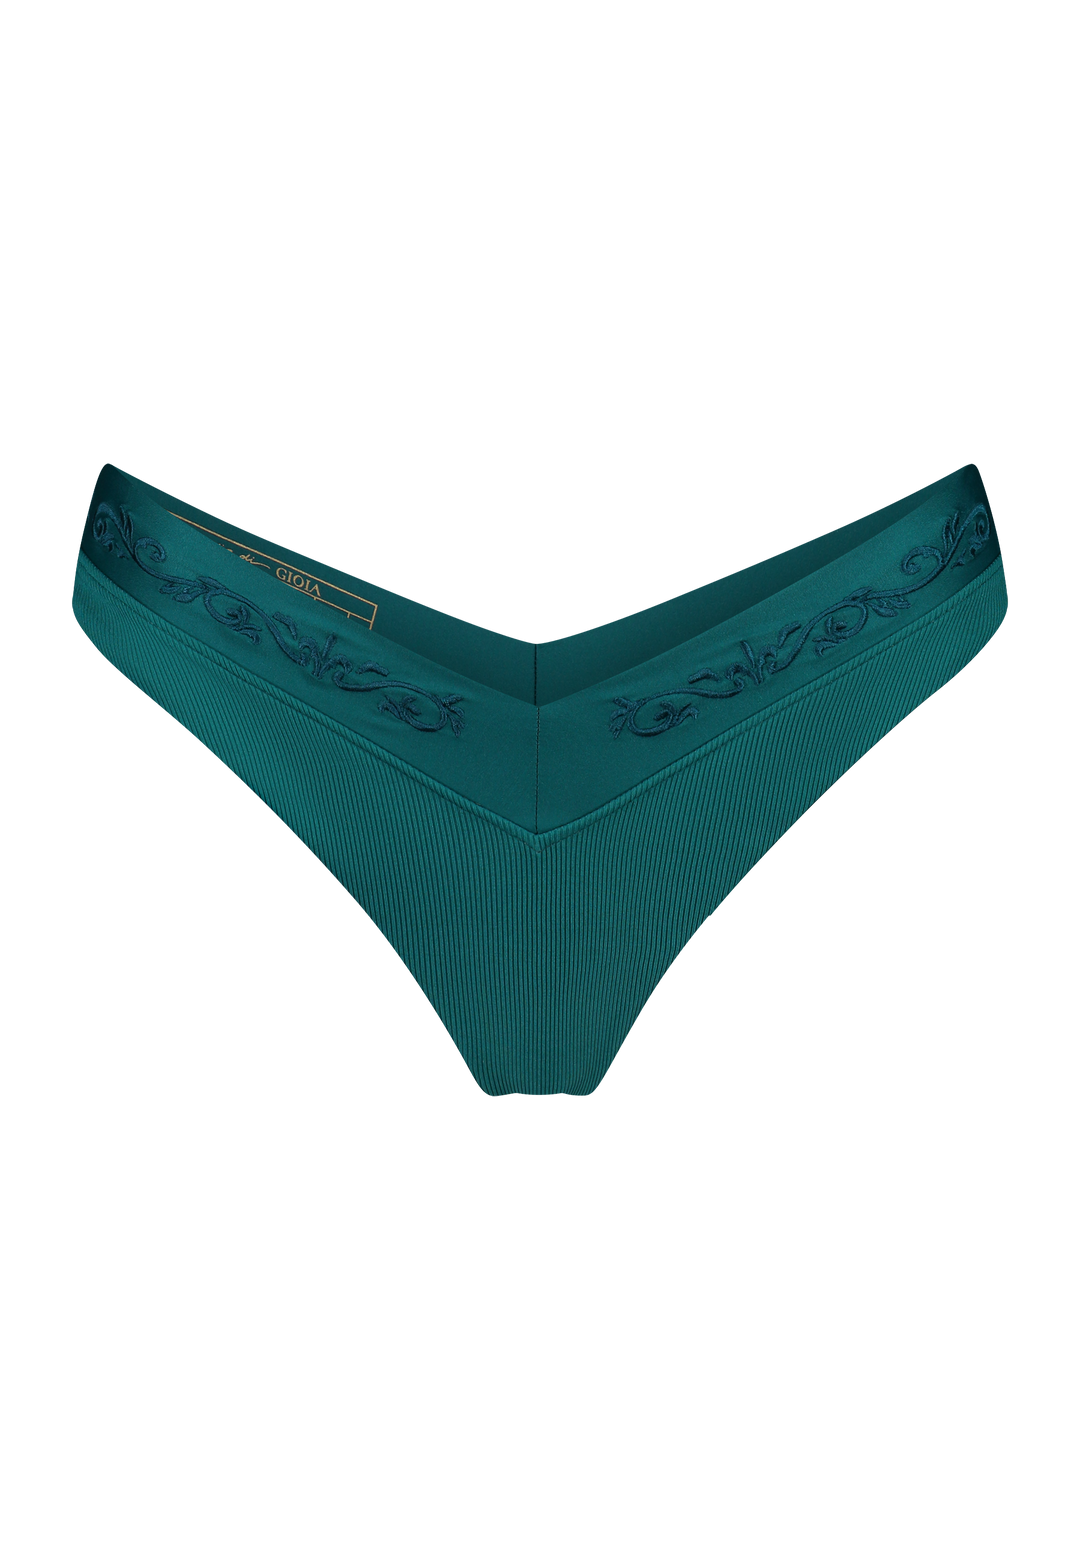 Bikini bottom V-shape in emerald green with rib fabric and embroidery, product front